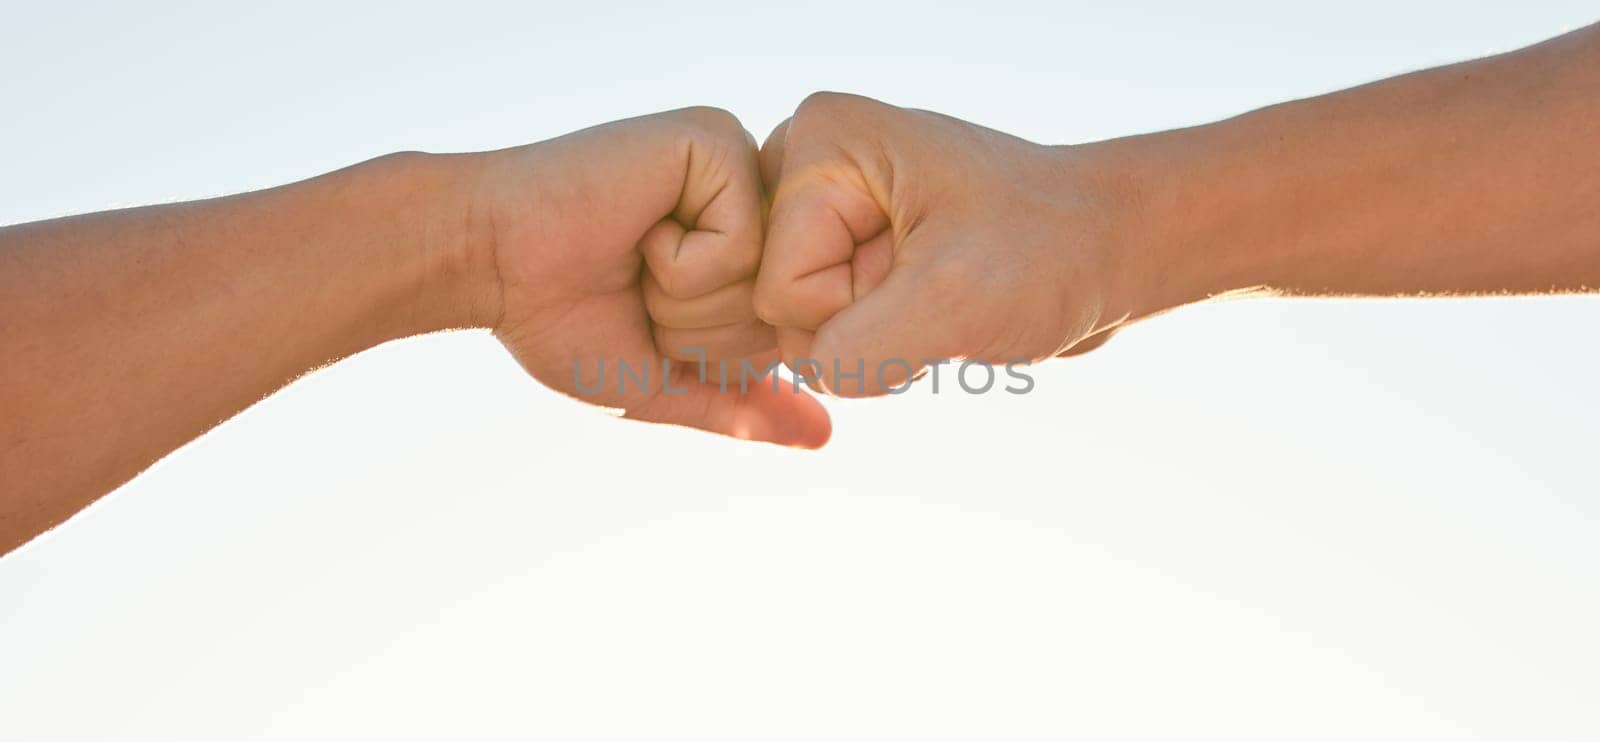 Fist bump, sky and hands of people for support, agreement and collaboration outdoors. Friends, teamwork and closeup of greeting gesture for friendship, community and solidarity on sky background.